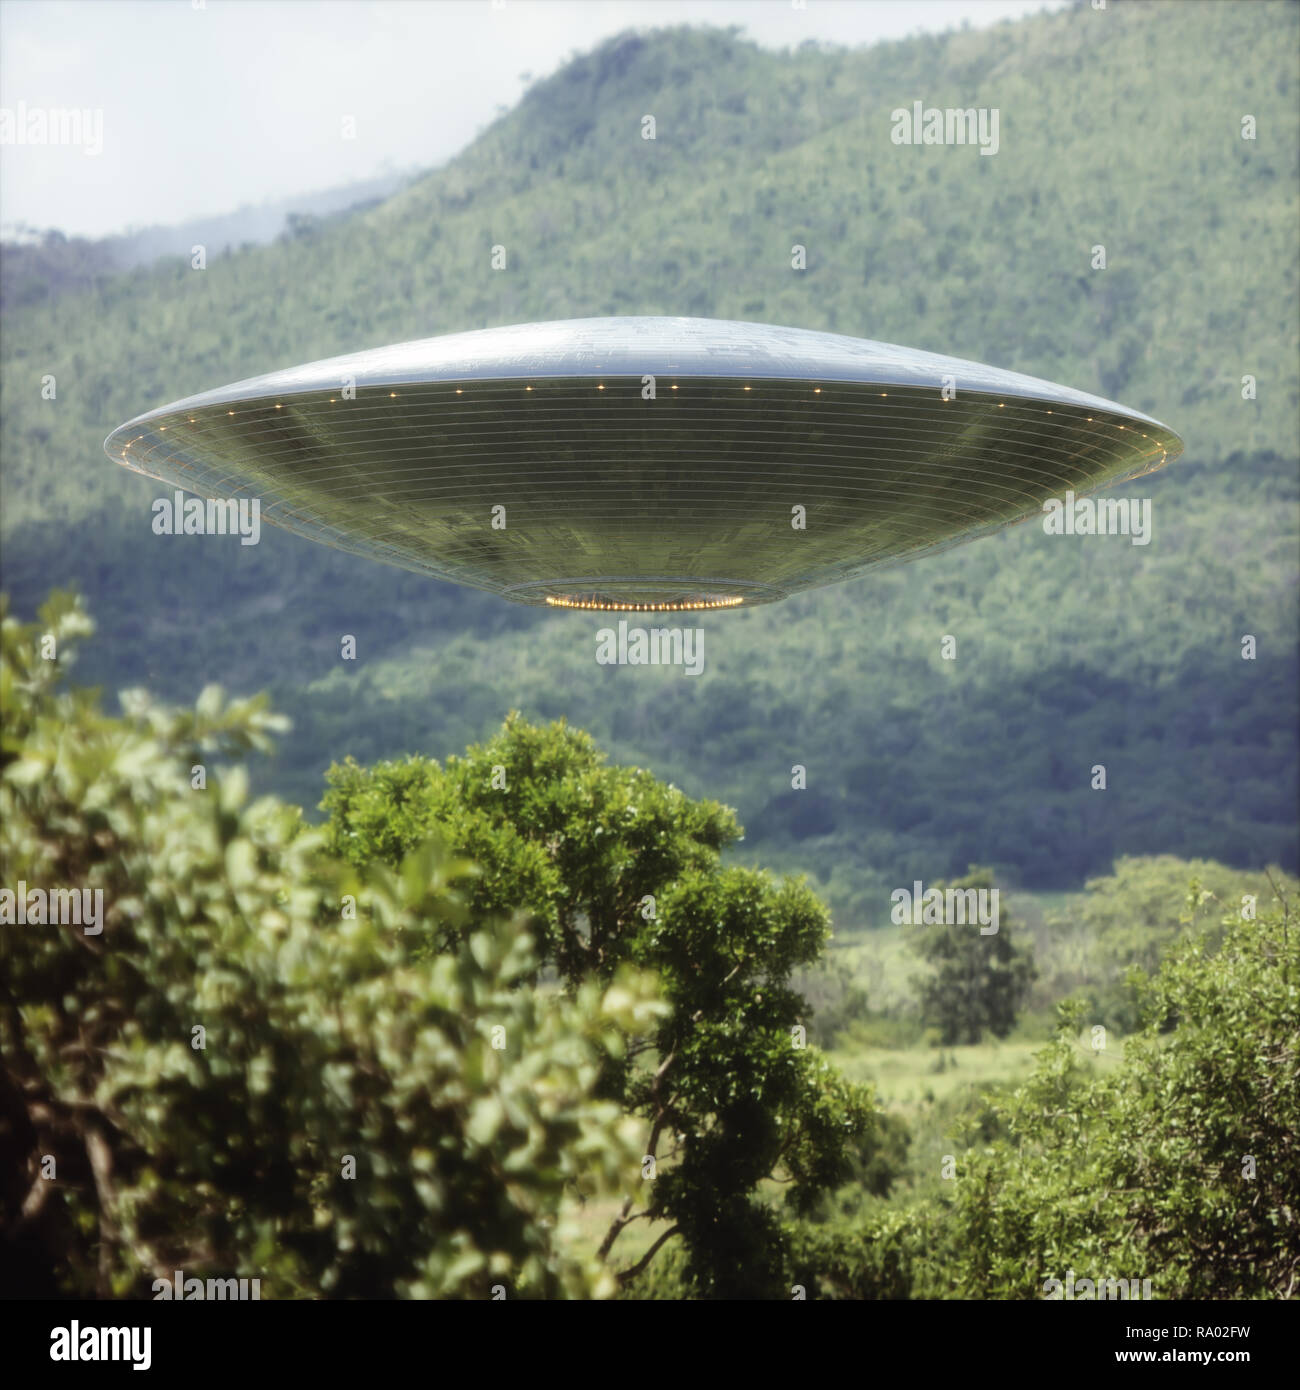 Unidentified flying object over a forest with trees and mountains behind. Stock Photo